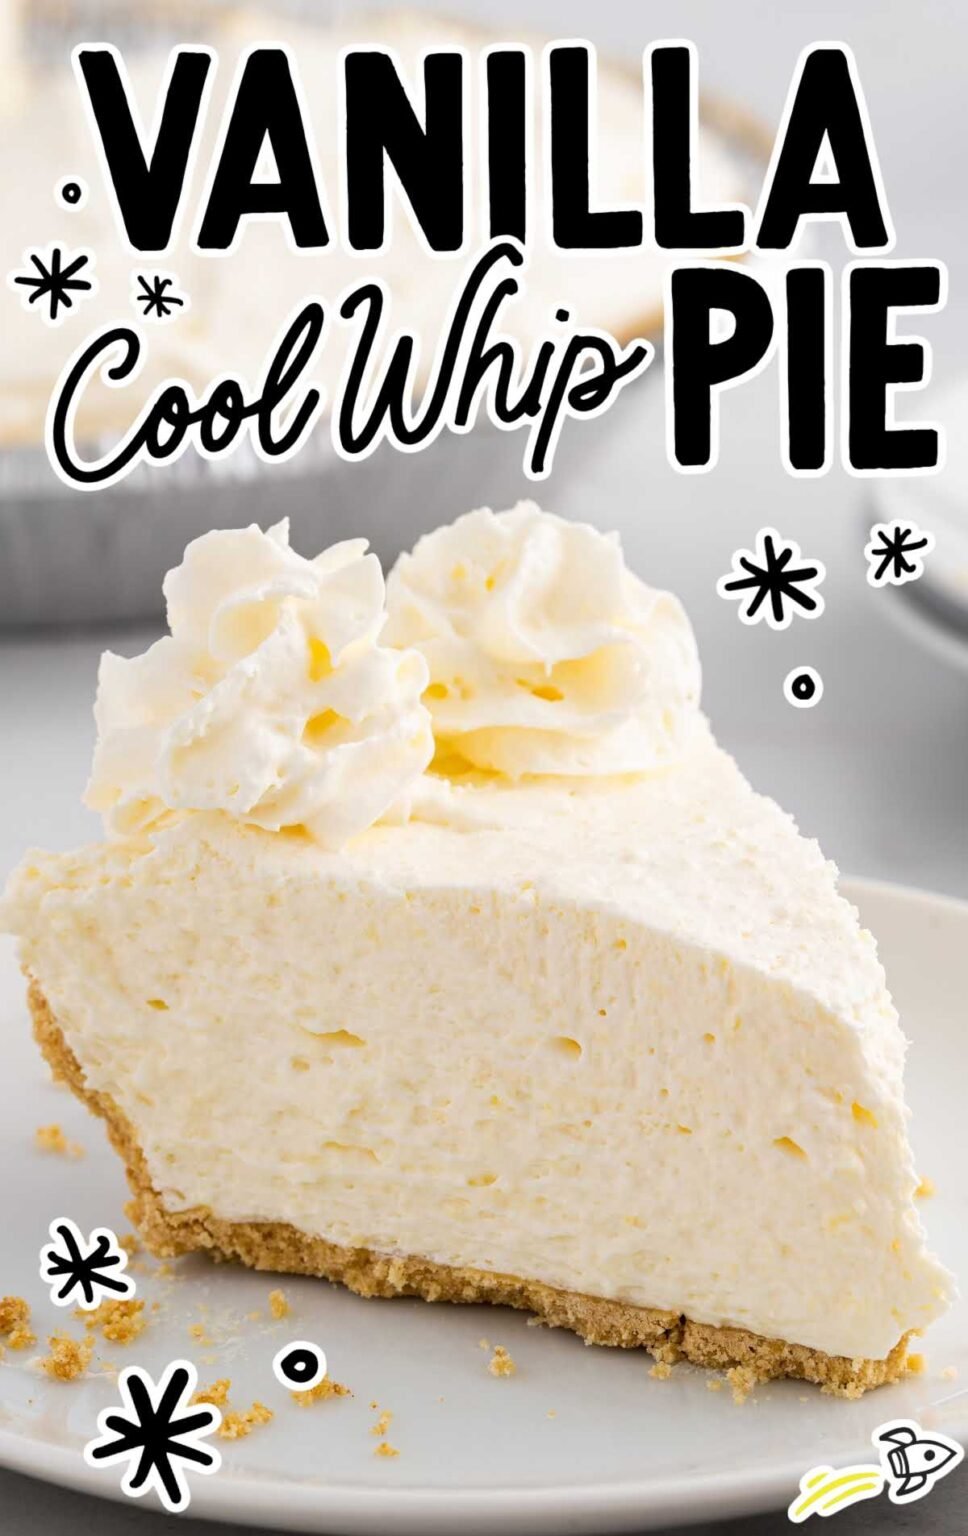 Vanilla Cool Whip Pie - Spaceships and Laser Beams